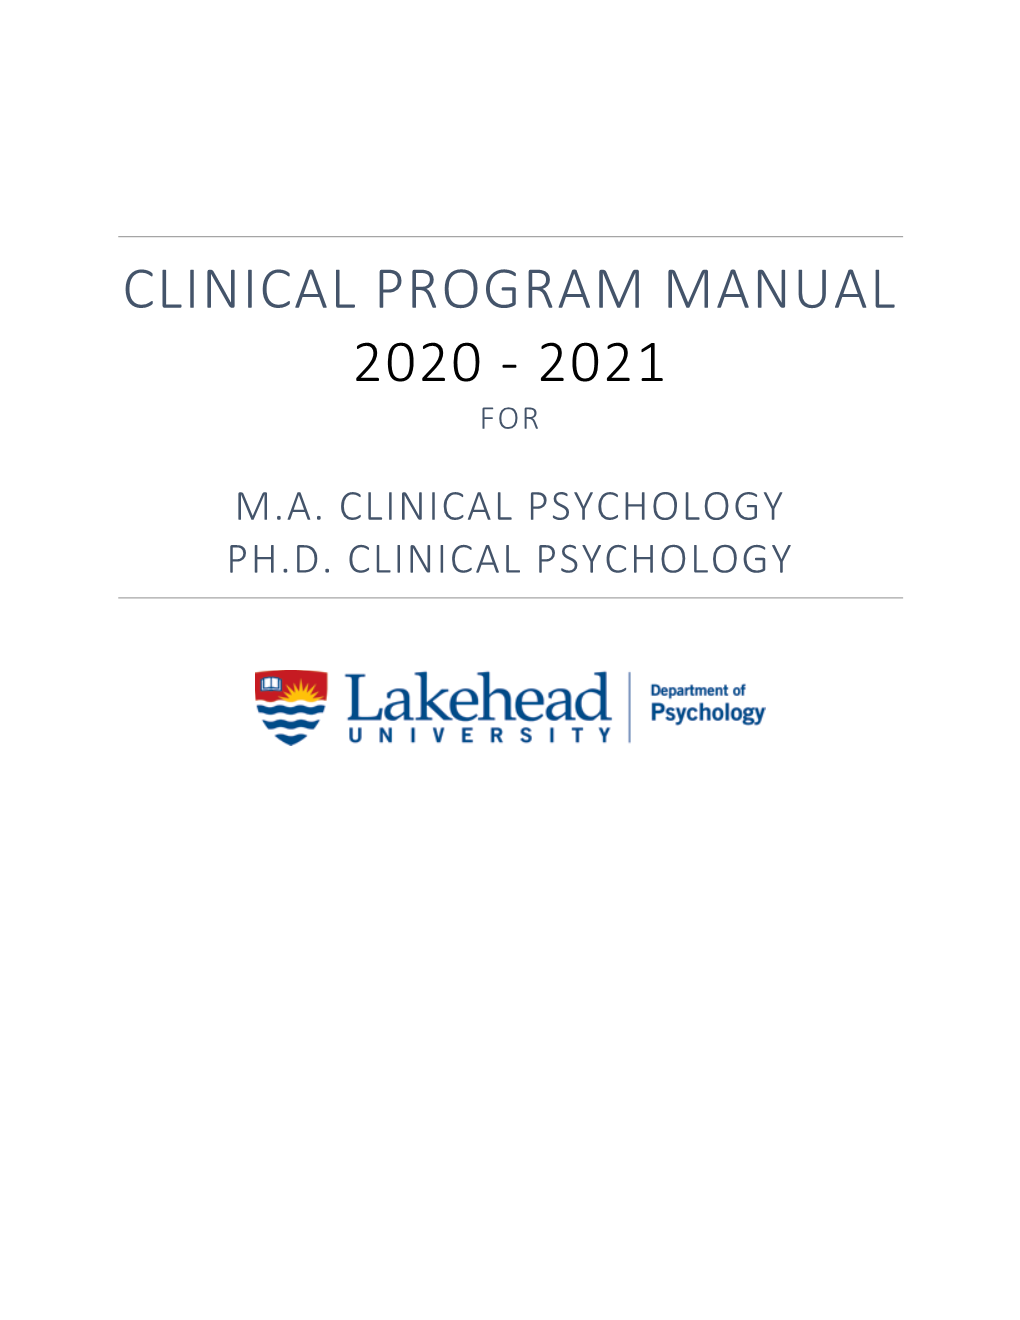 Clinical Program Manual 2020 - 2021 For